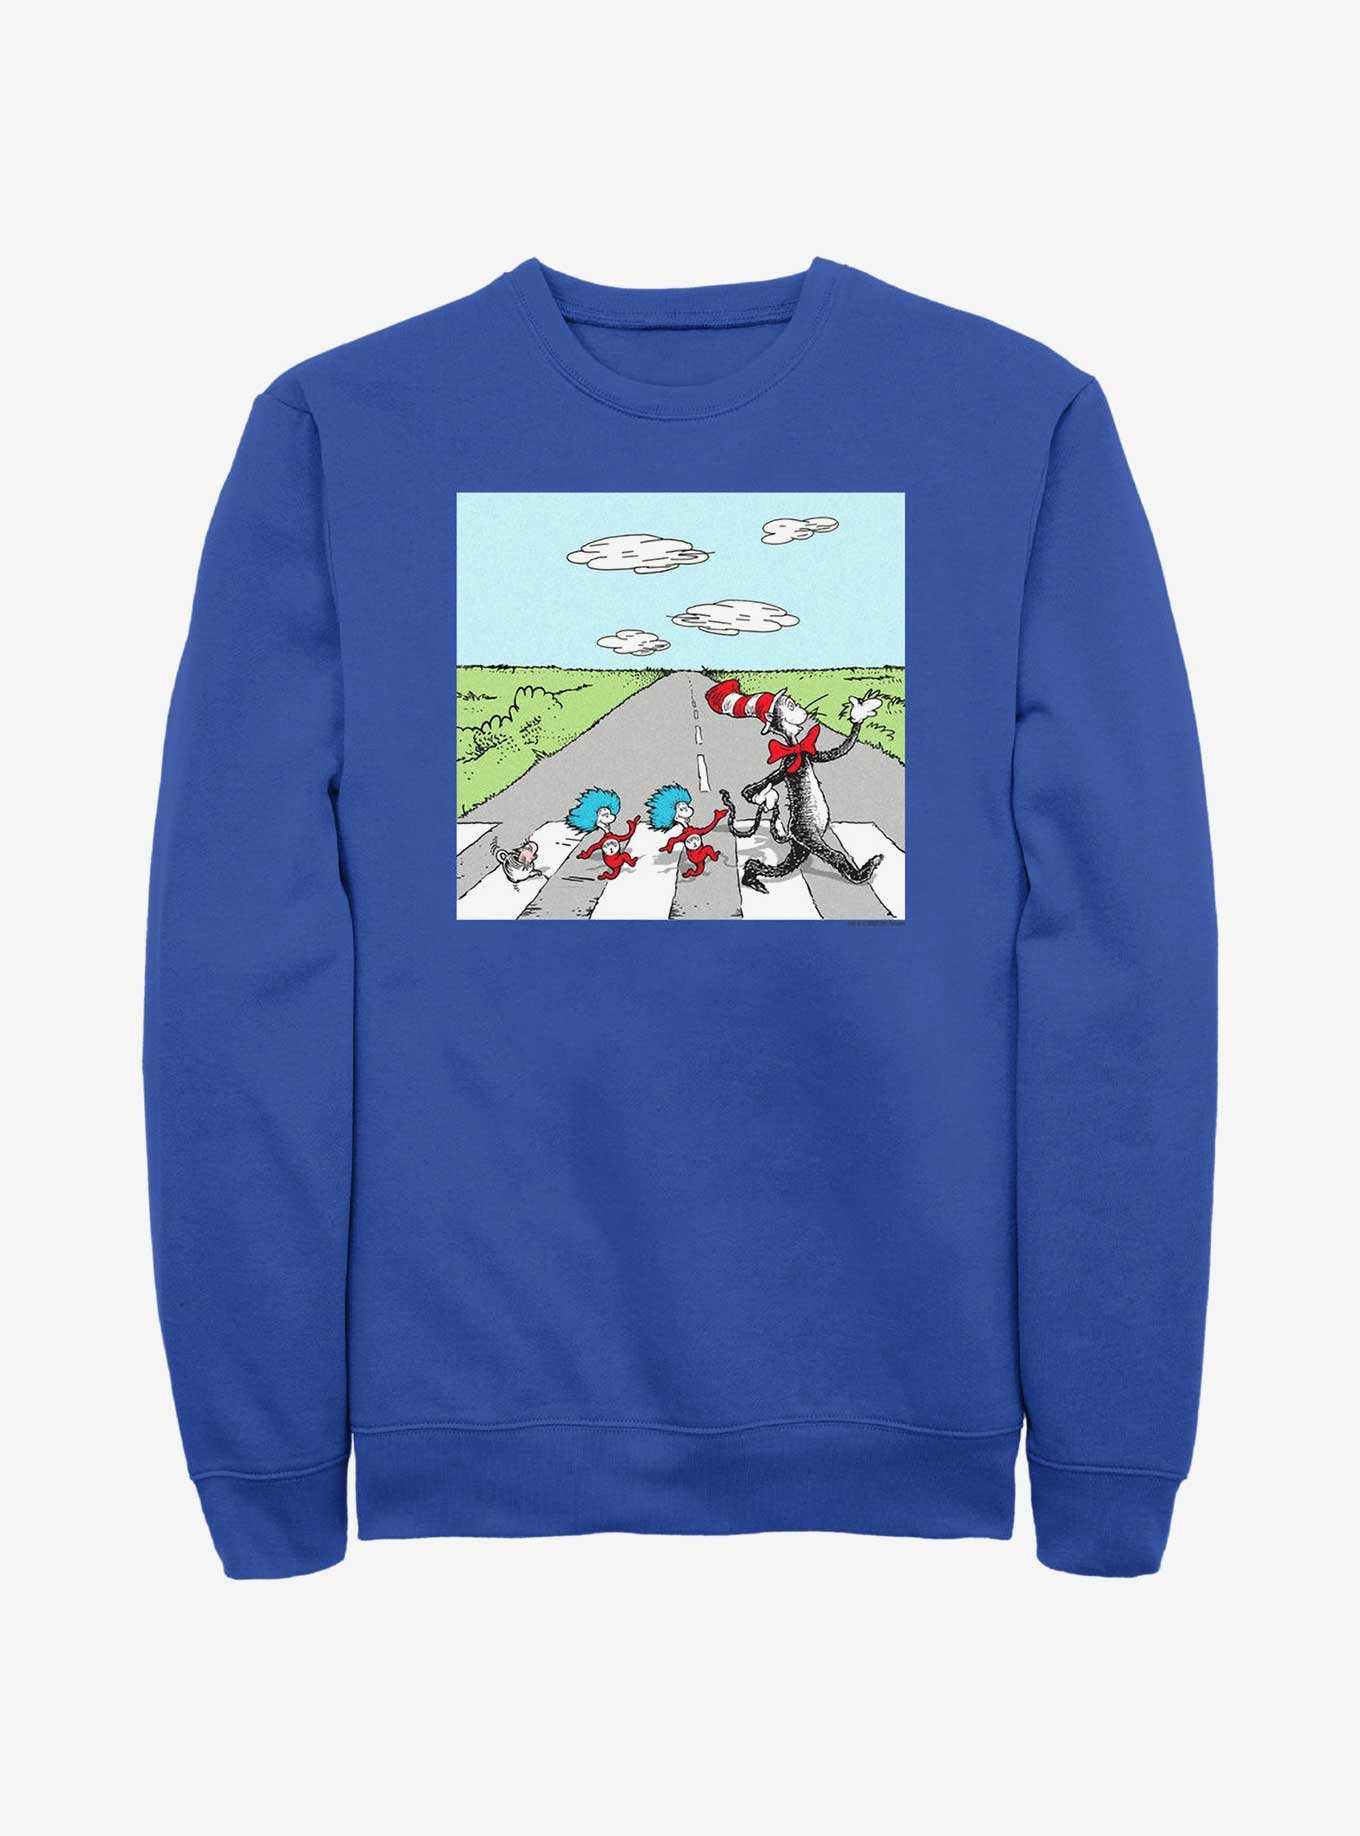 Dr. Seuss The Cat In The Hat and Things Crossing Sweatshirt, , hi-res